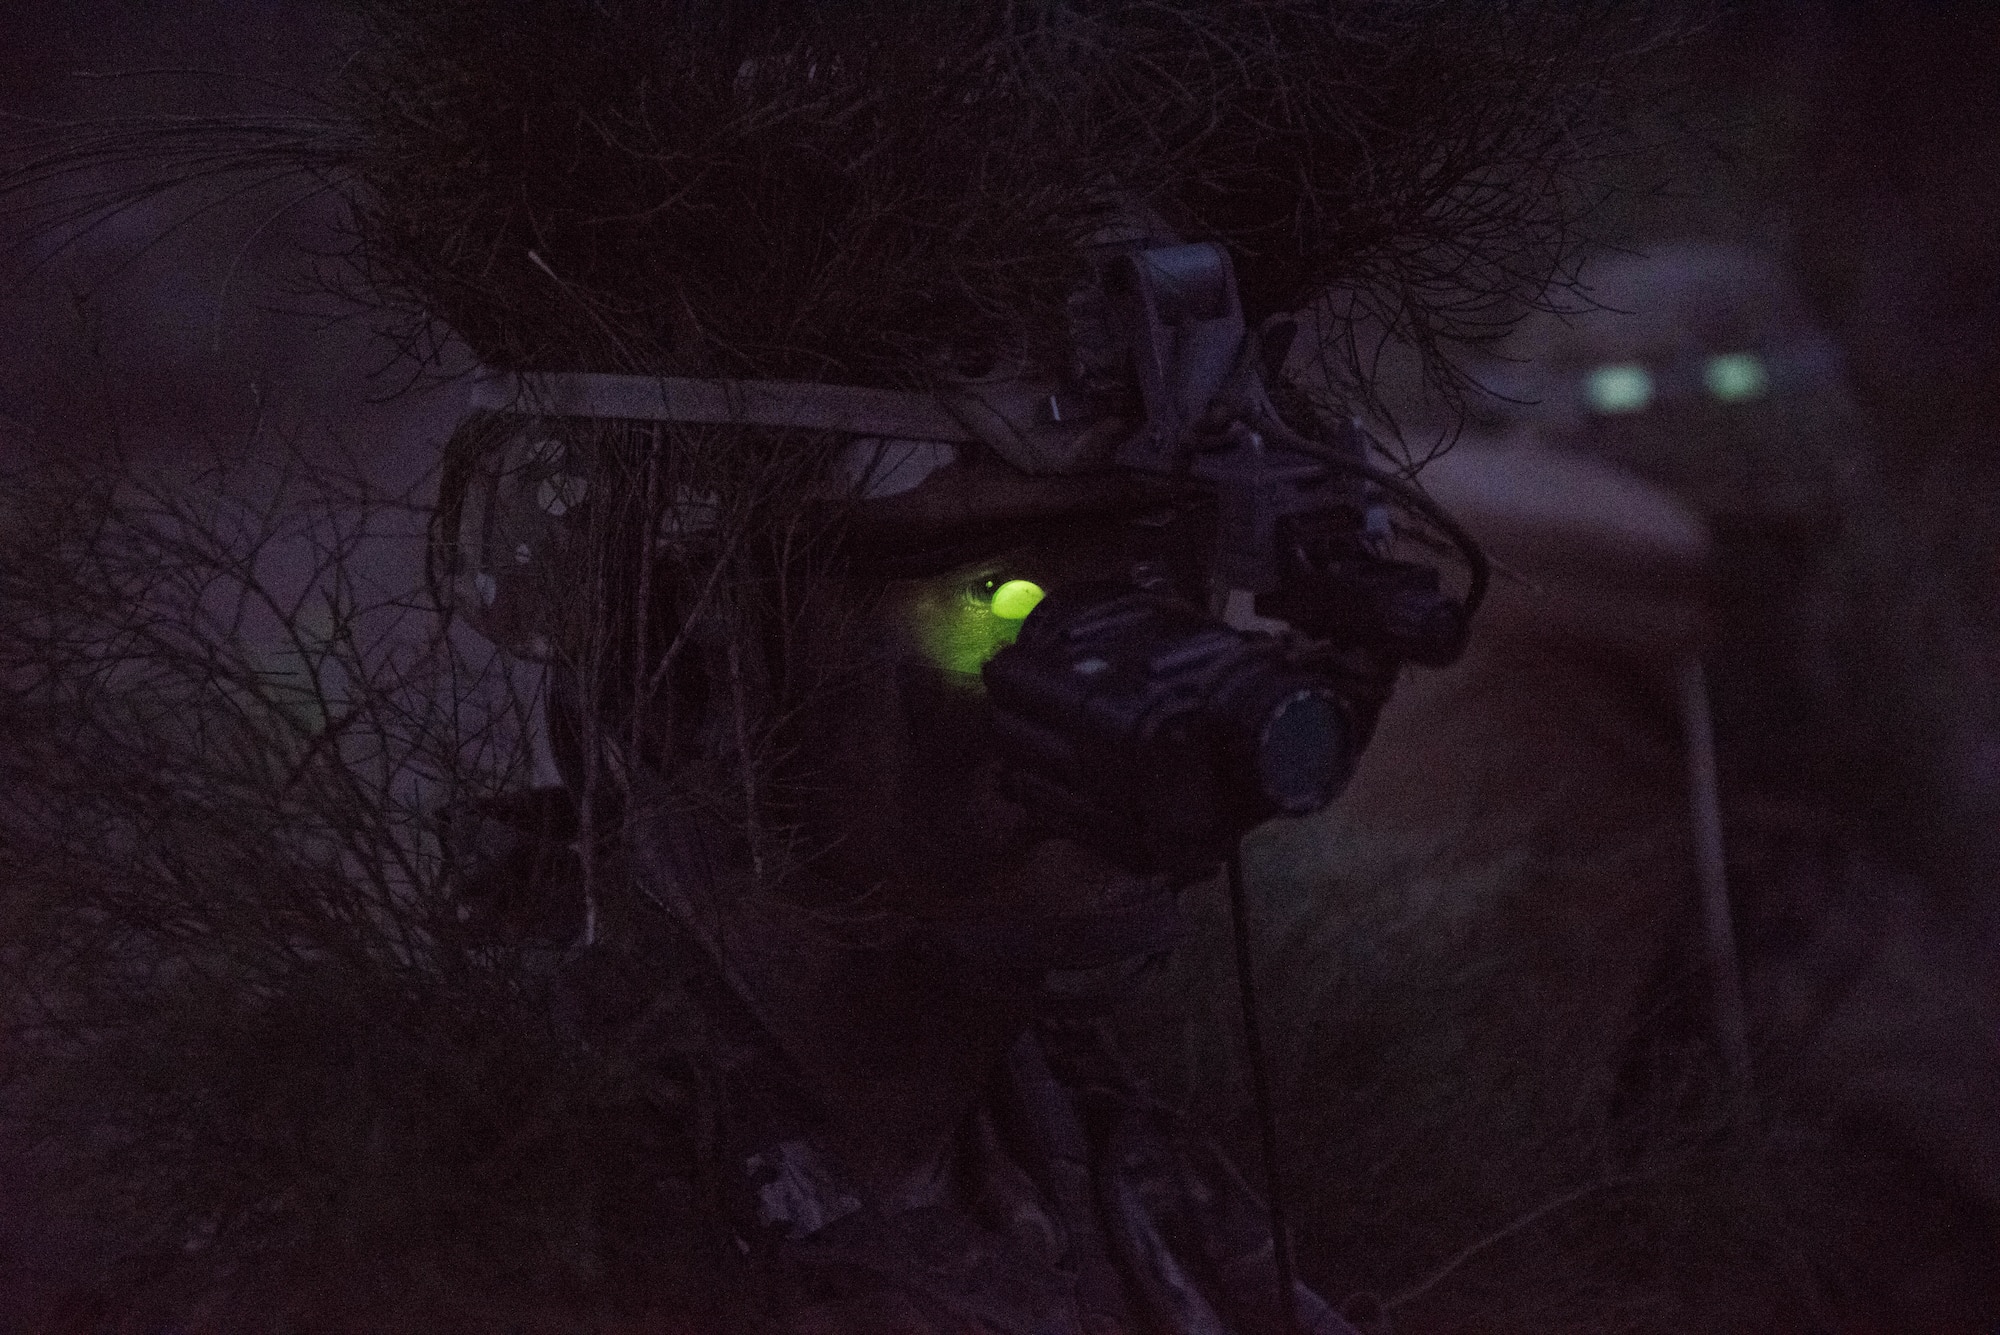 Senior Airman Kimball Butler, Ranger Assessment Course student, dons his night vision gear and prepares for a simulated ambush during training near Schofield Barracks, Oahu, Hawaii, May 23, 2019. Twenty-three Airmen from across the Air Force recently converged on a training camp for a three-week Ranger Assessment Course May 12-31, 2019. The purpose of the 19-day course is to prepare, assess and evaluate Air Force candidates for Army Ranger School. (U.S. Air Force photo by Staff Sgt. Hailey Haux)